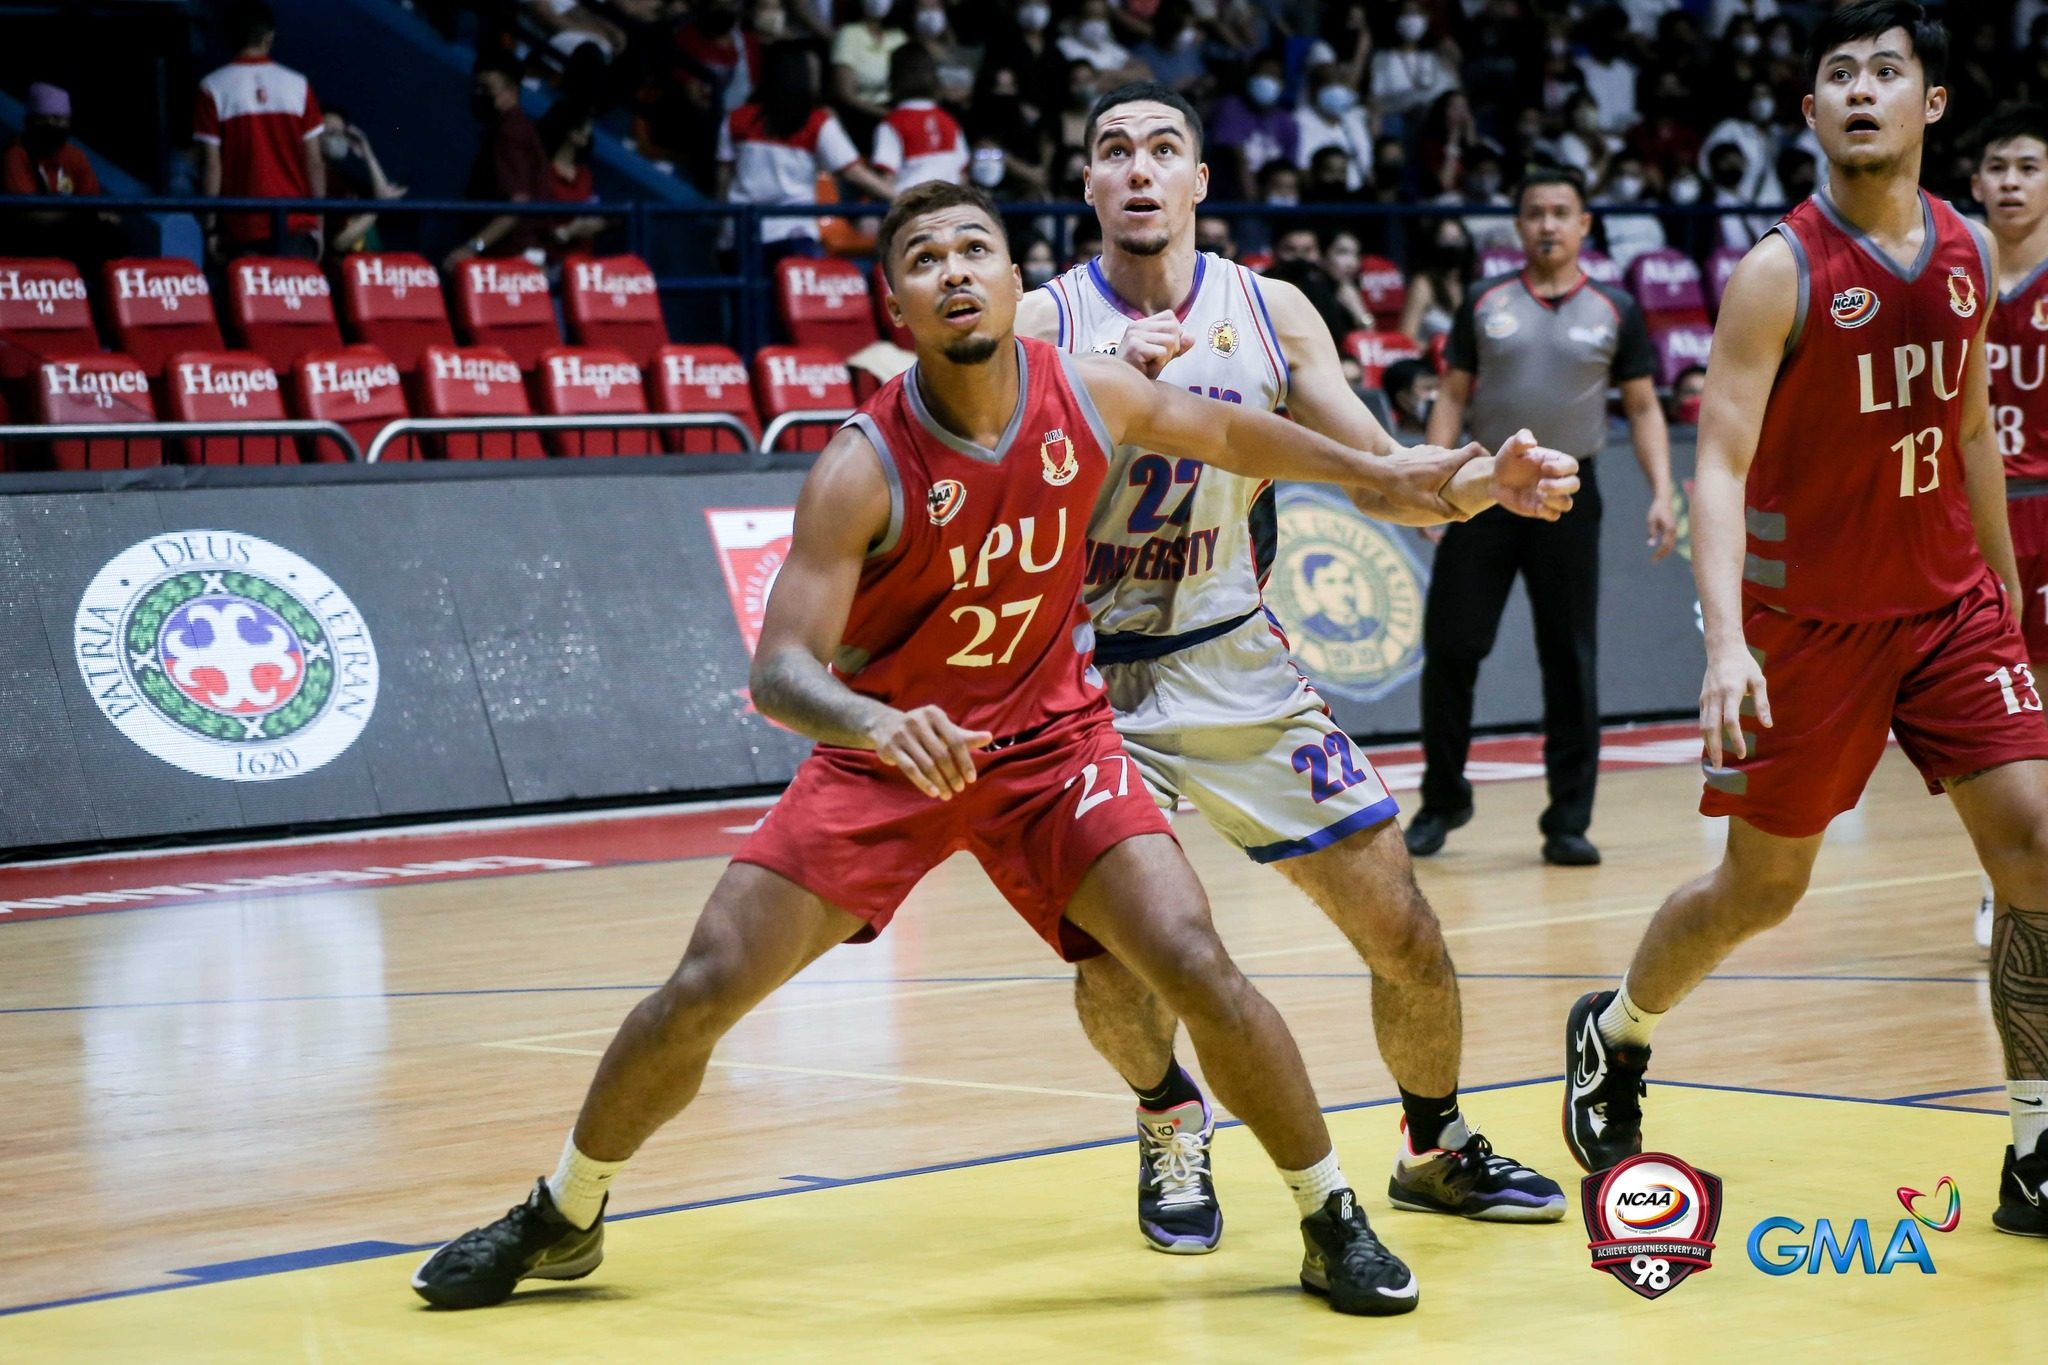 Lyceum wraps up first round with thriller over Arellano